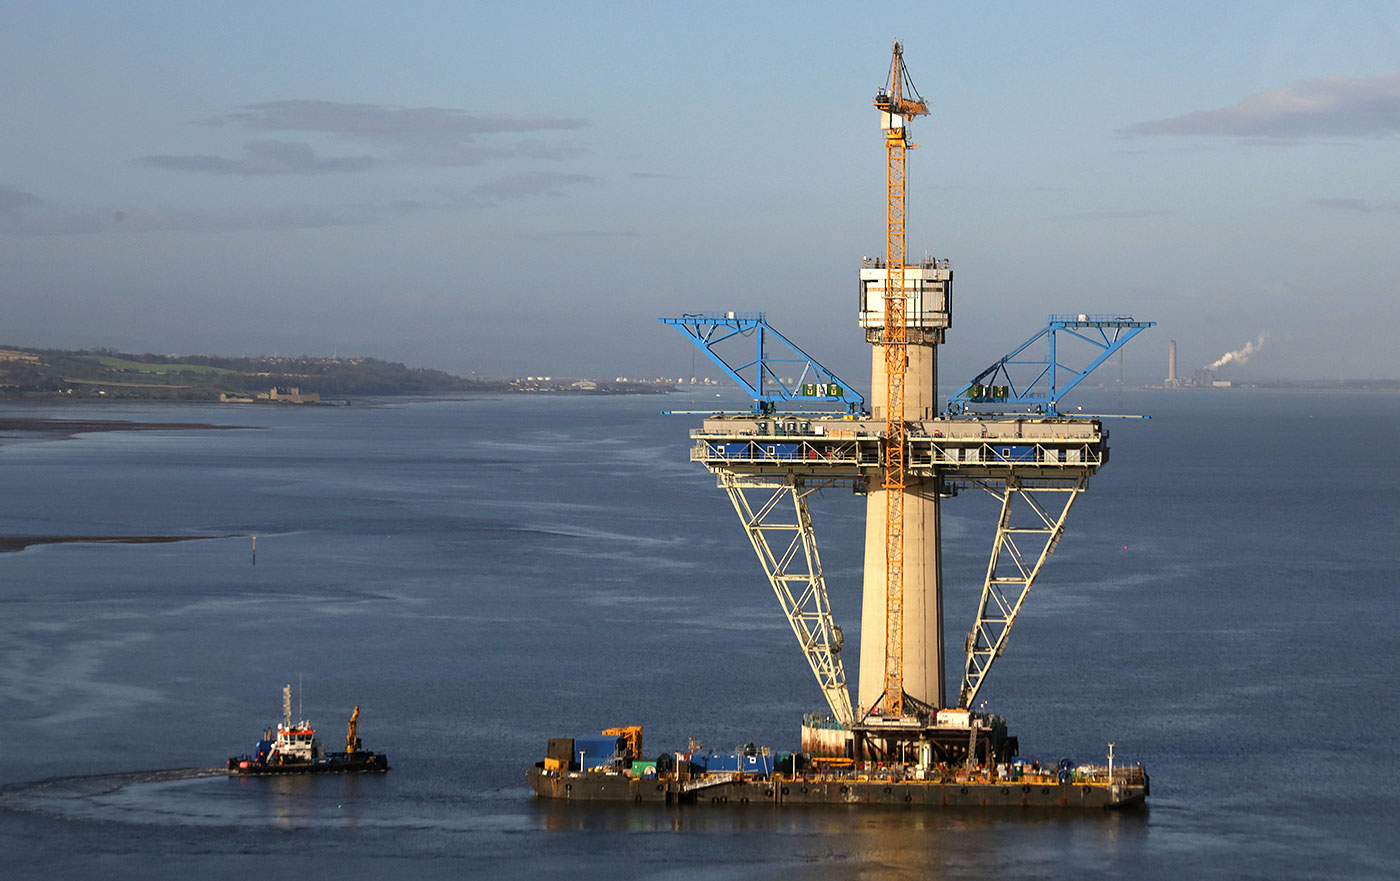 Queensferry Crossing under construction  -  View from Southern end of Crossing